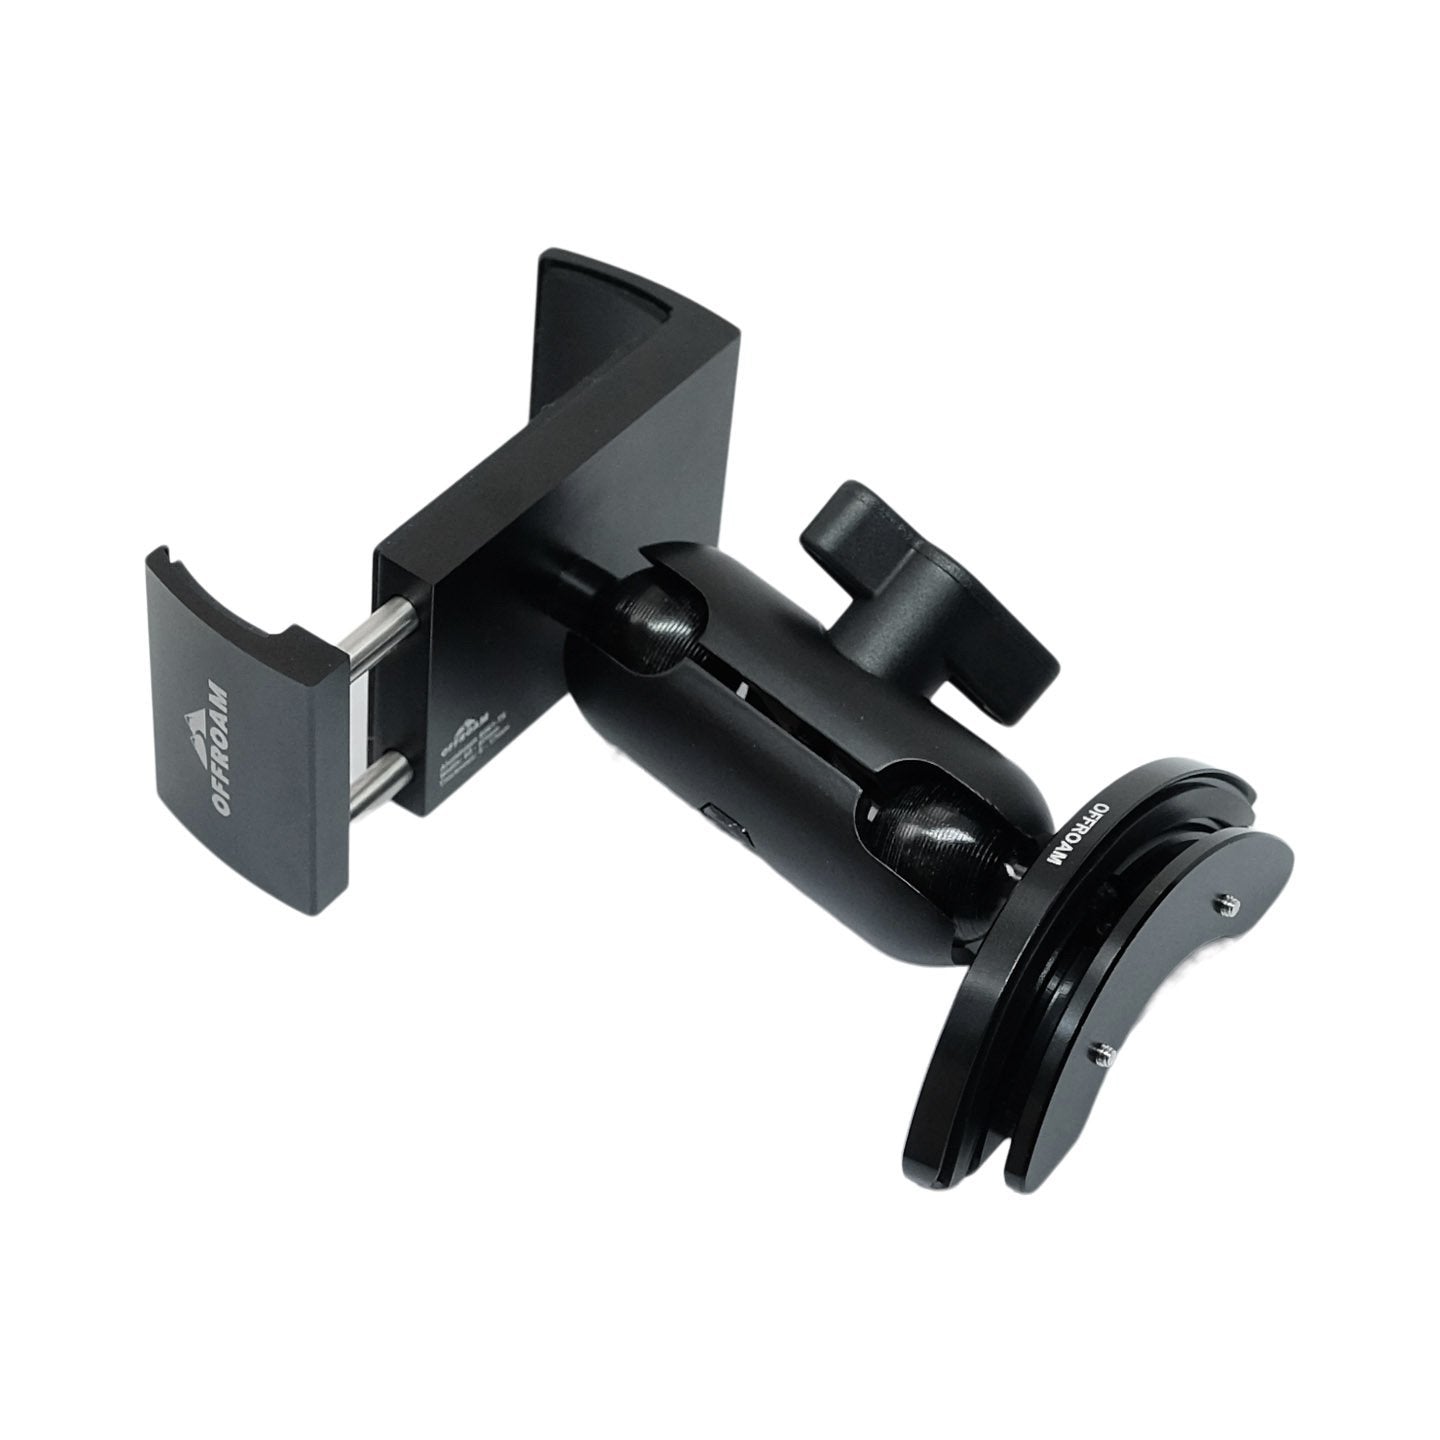 Toyota LandCruiser 70 phone mount | Phone Mount for Troop Carrier | WorkMate 